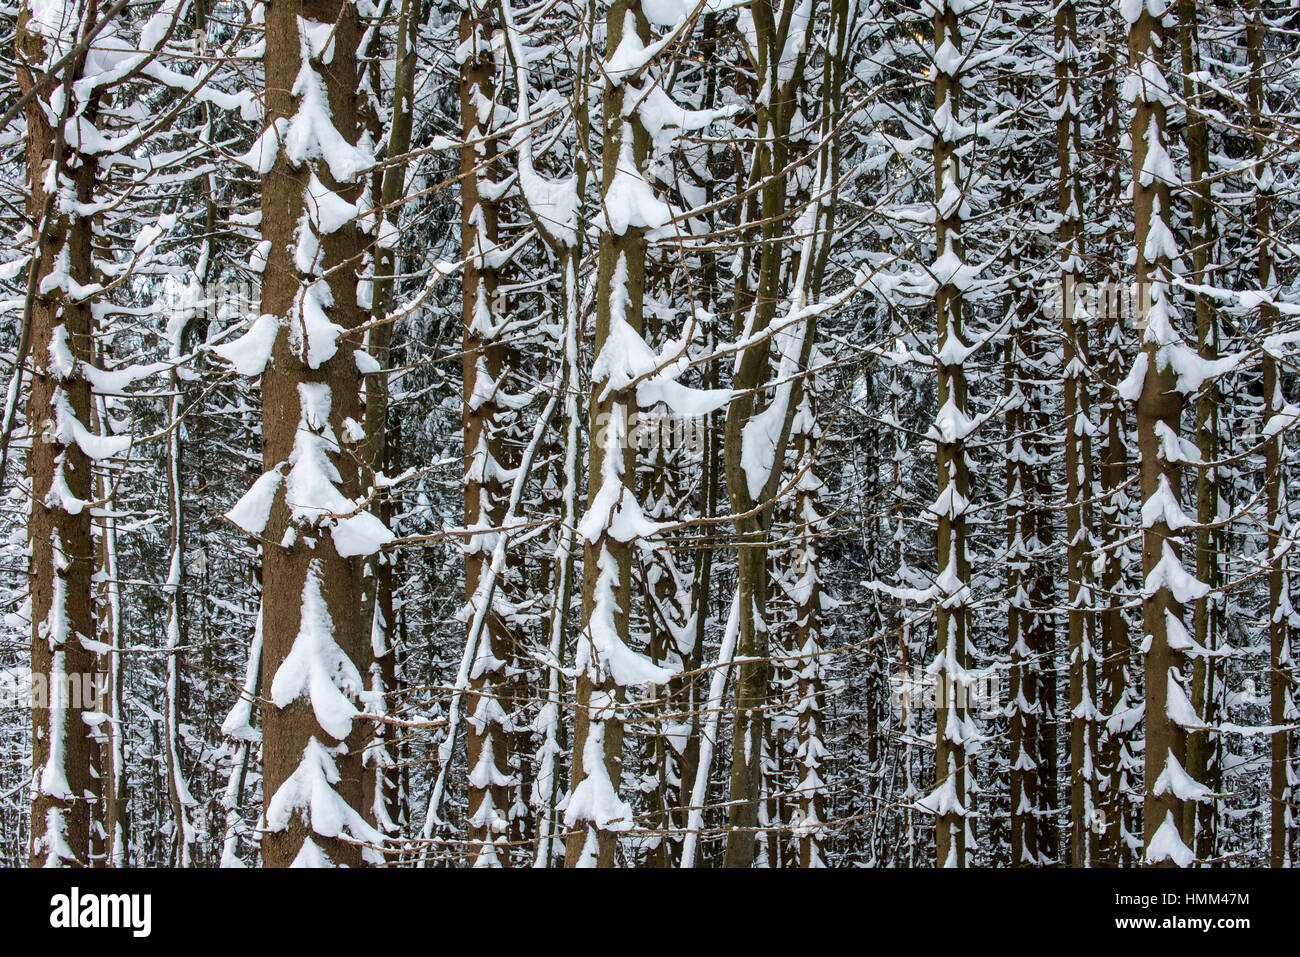 Norway spruce trees (Picea abies) in coniferous forest showing trunks and branches covered in snow in winter Stock Photo